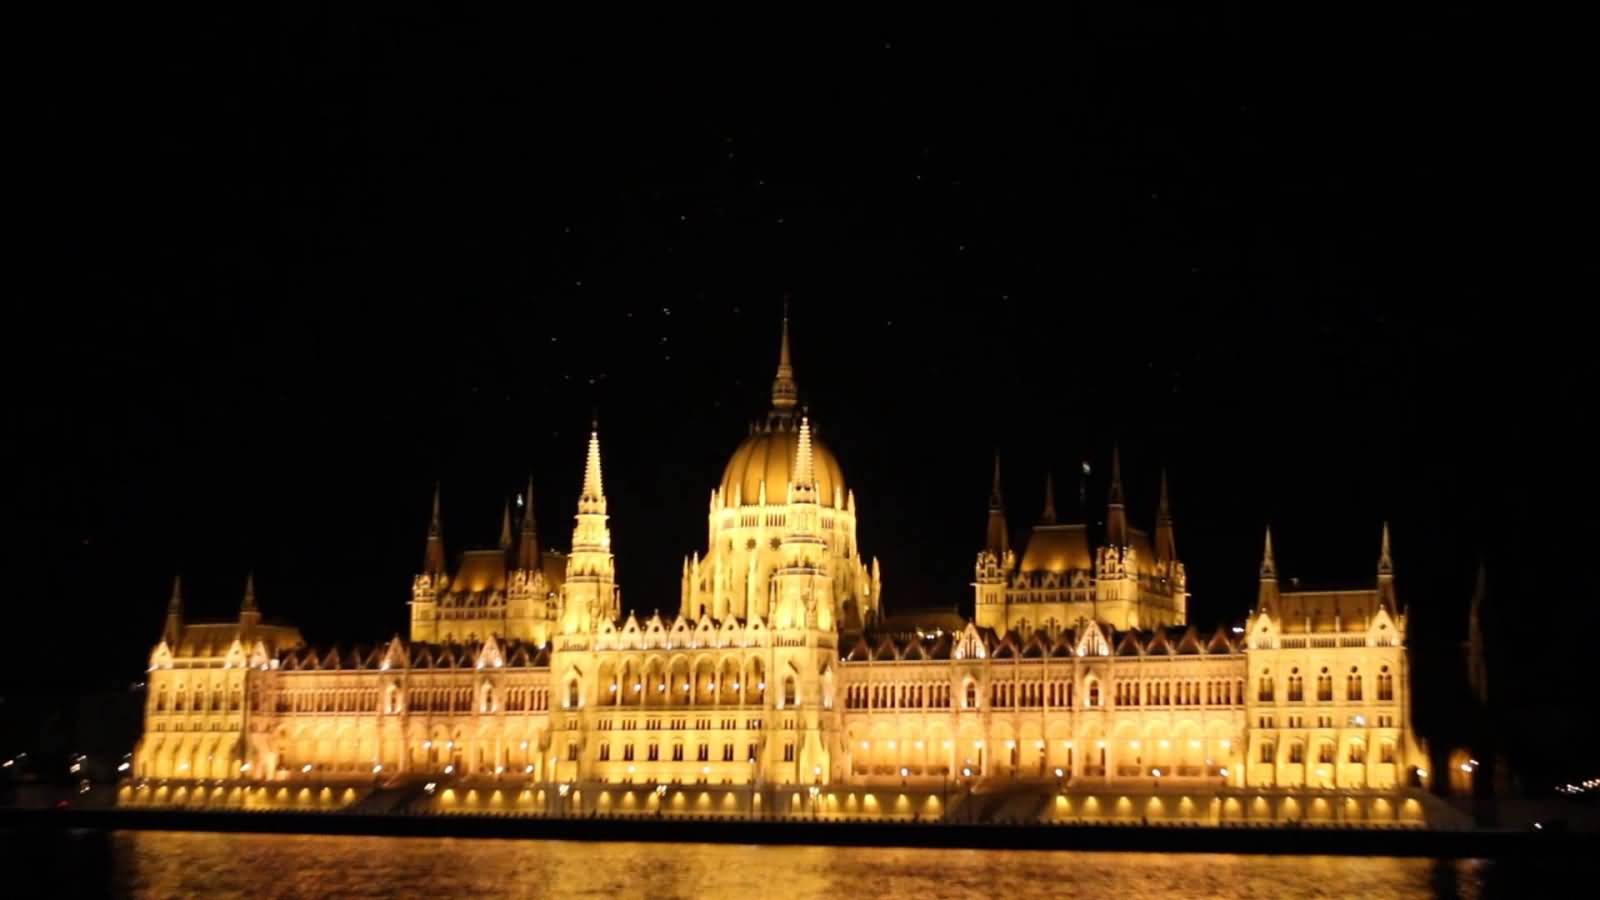 Birds Swirling Over The Hungarian Parliament Building At Night